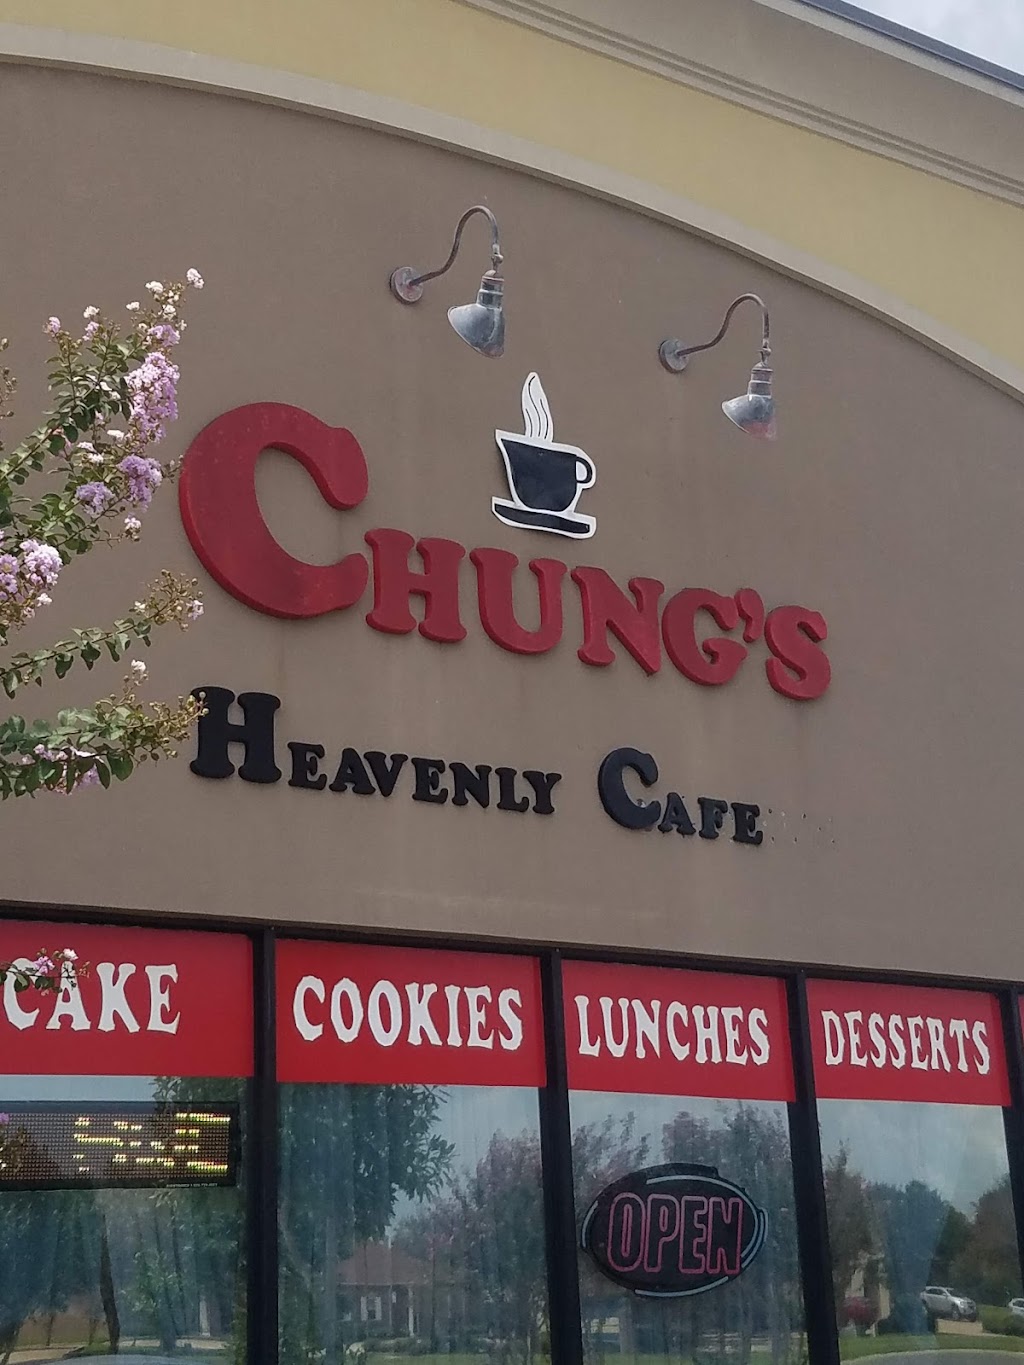 Chungs Heavenly Sweets | 607 Belle Terre Blvd, Laplace, LA 70068 | Phone: (985) 359-7987